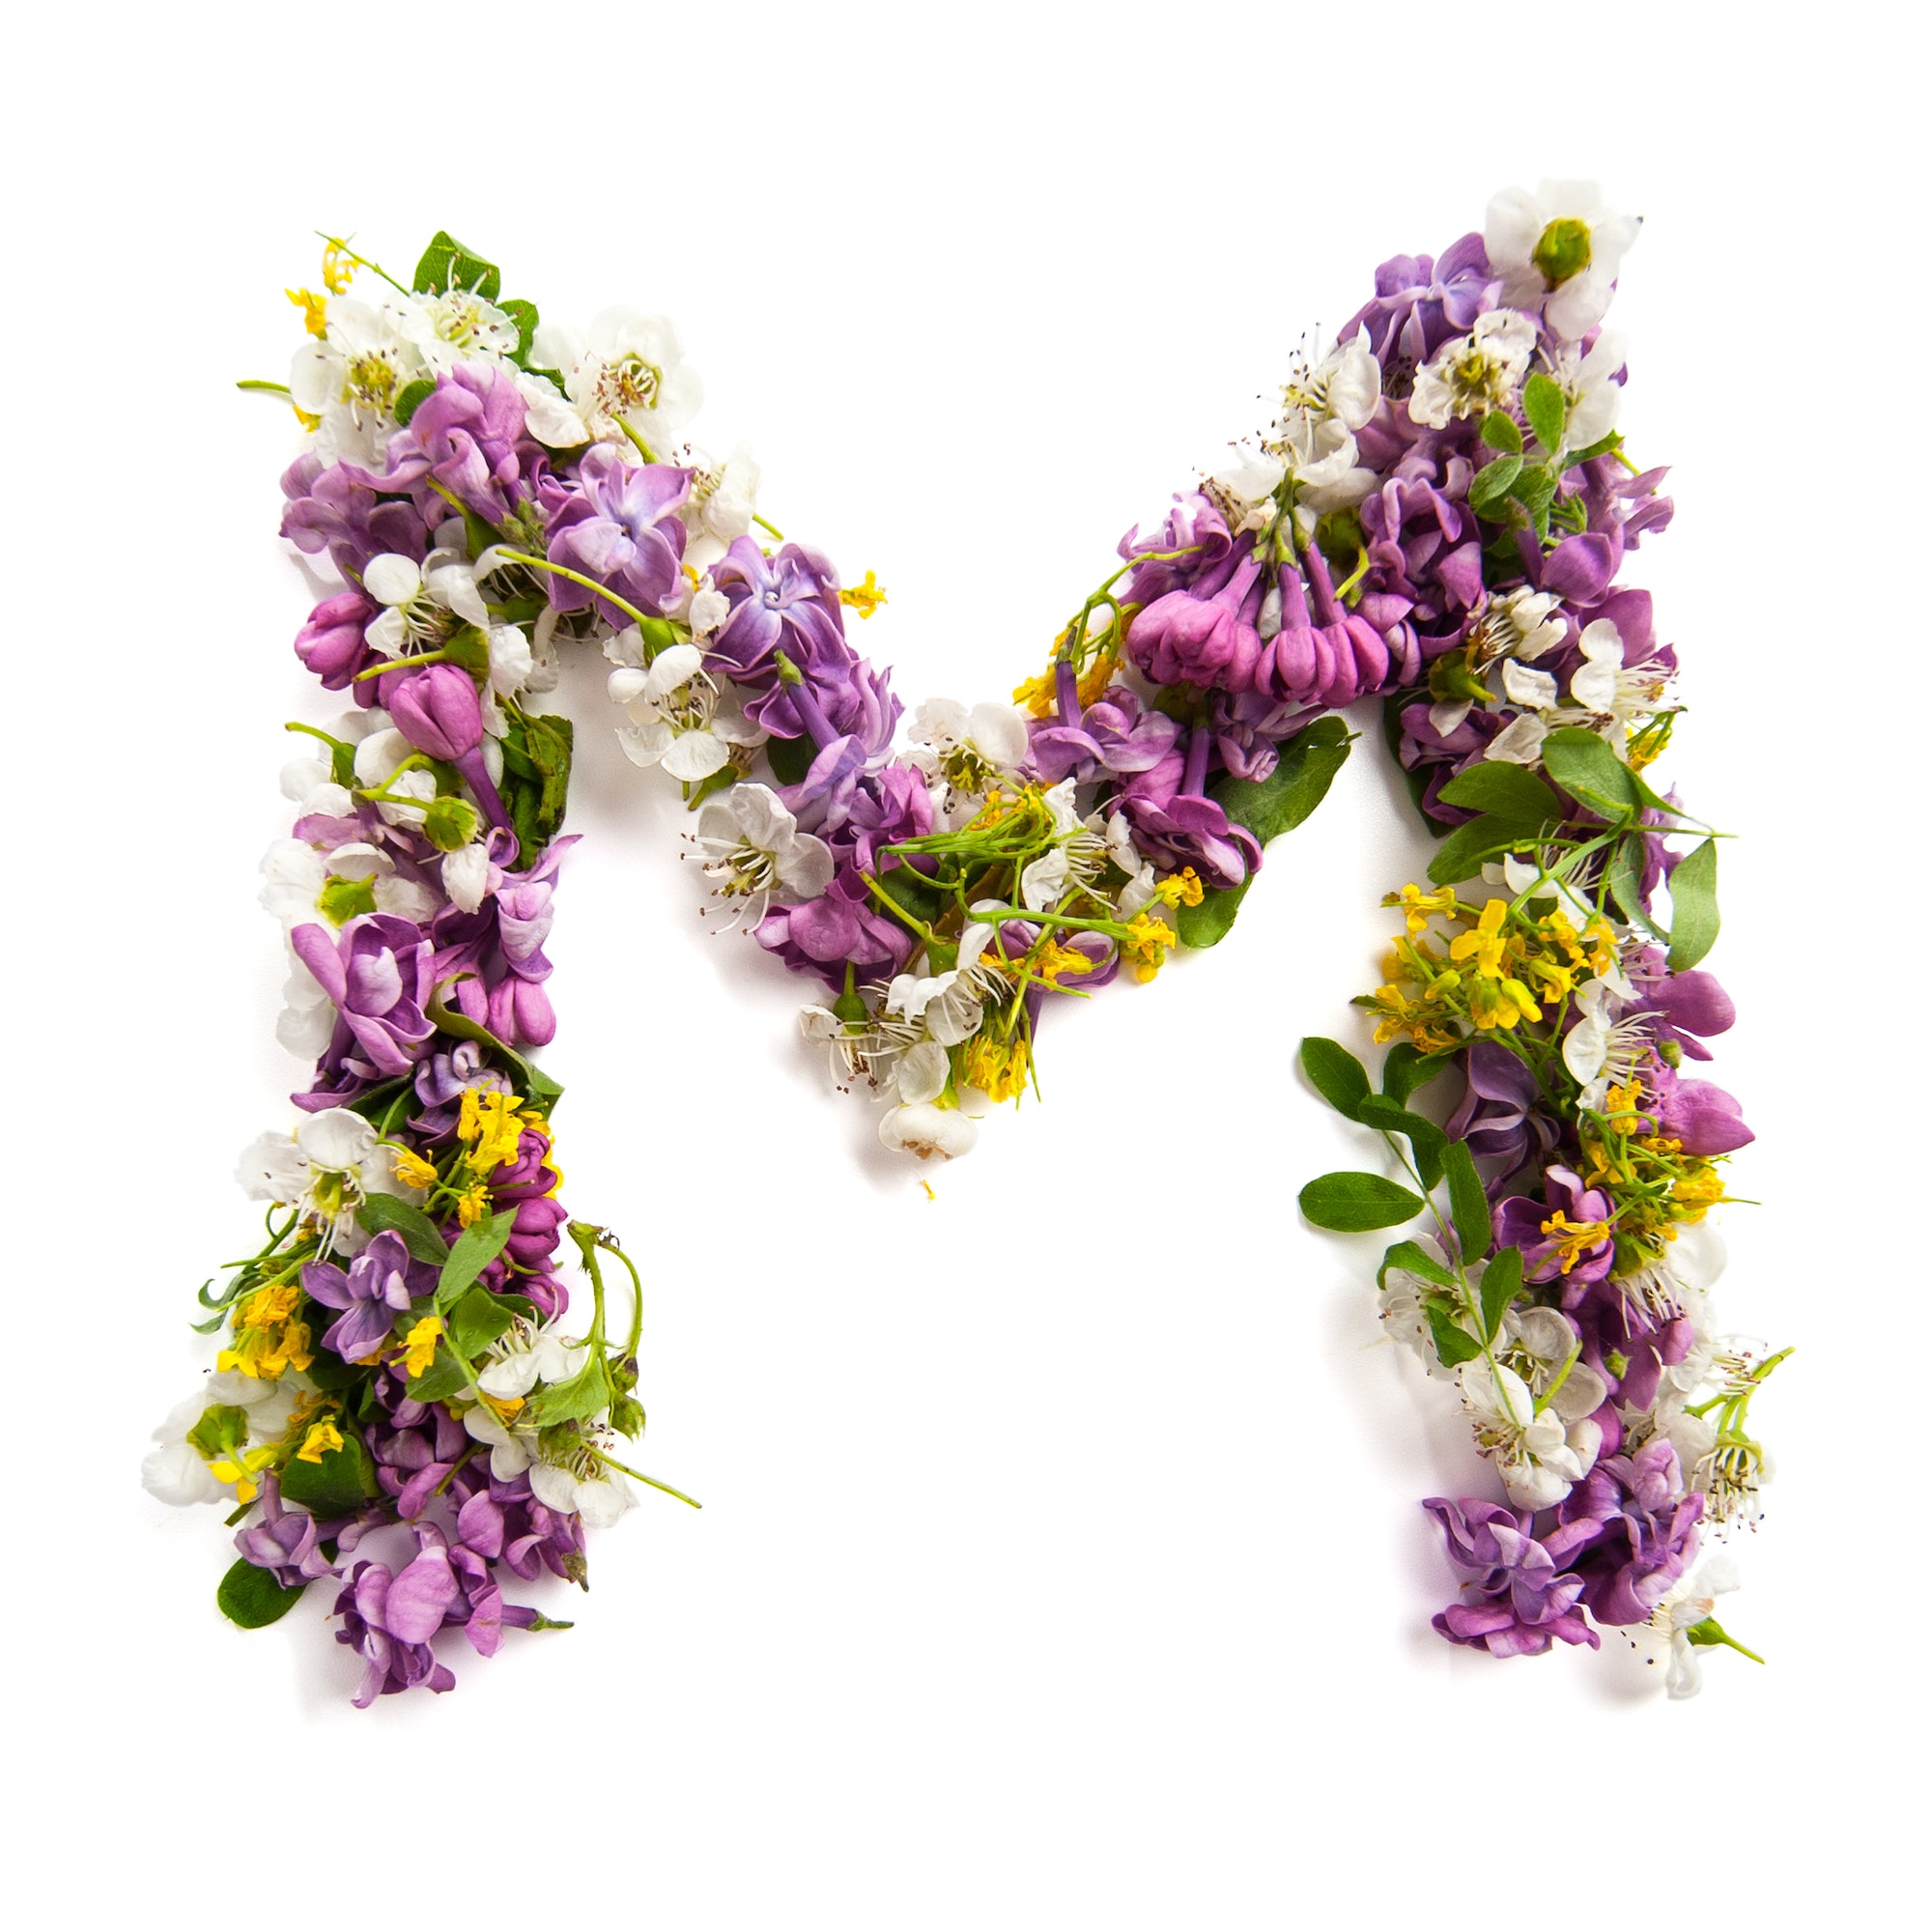 The letter «M» made of various natural small flowers.